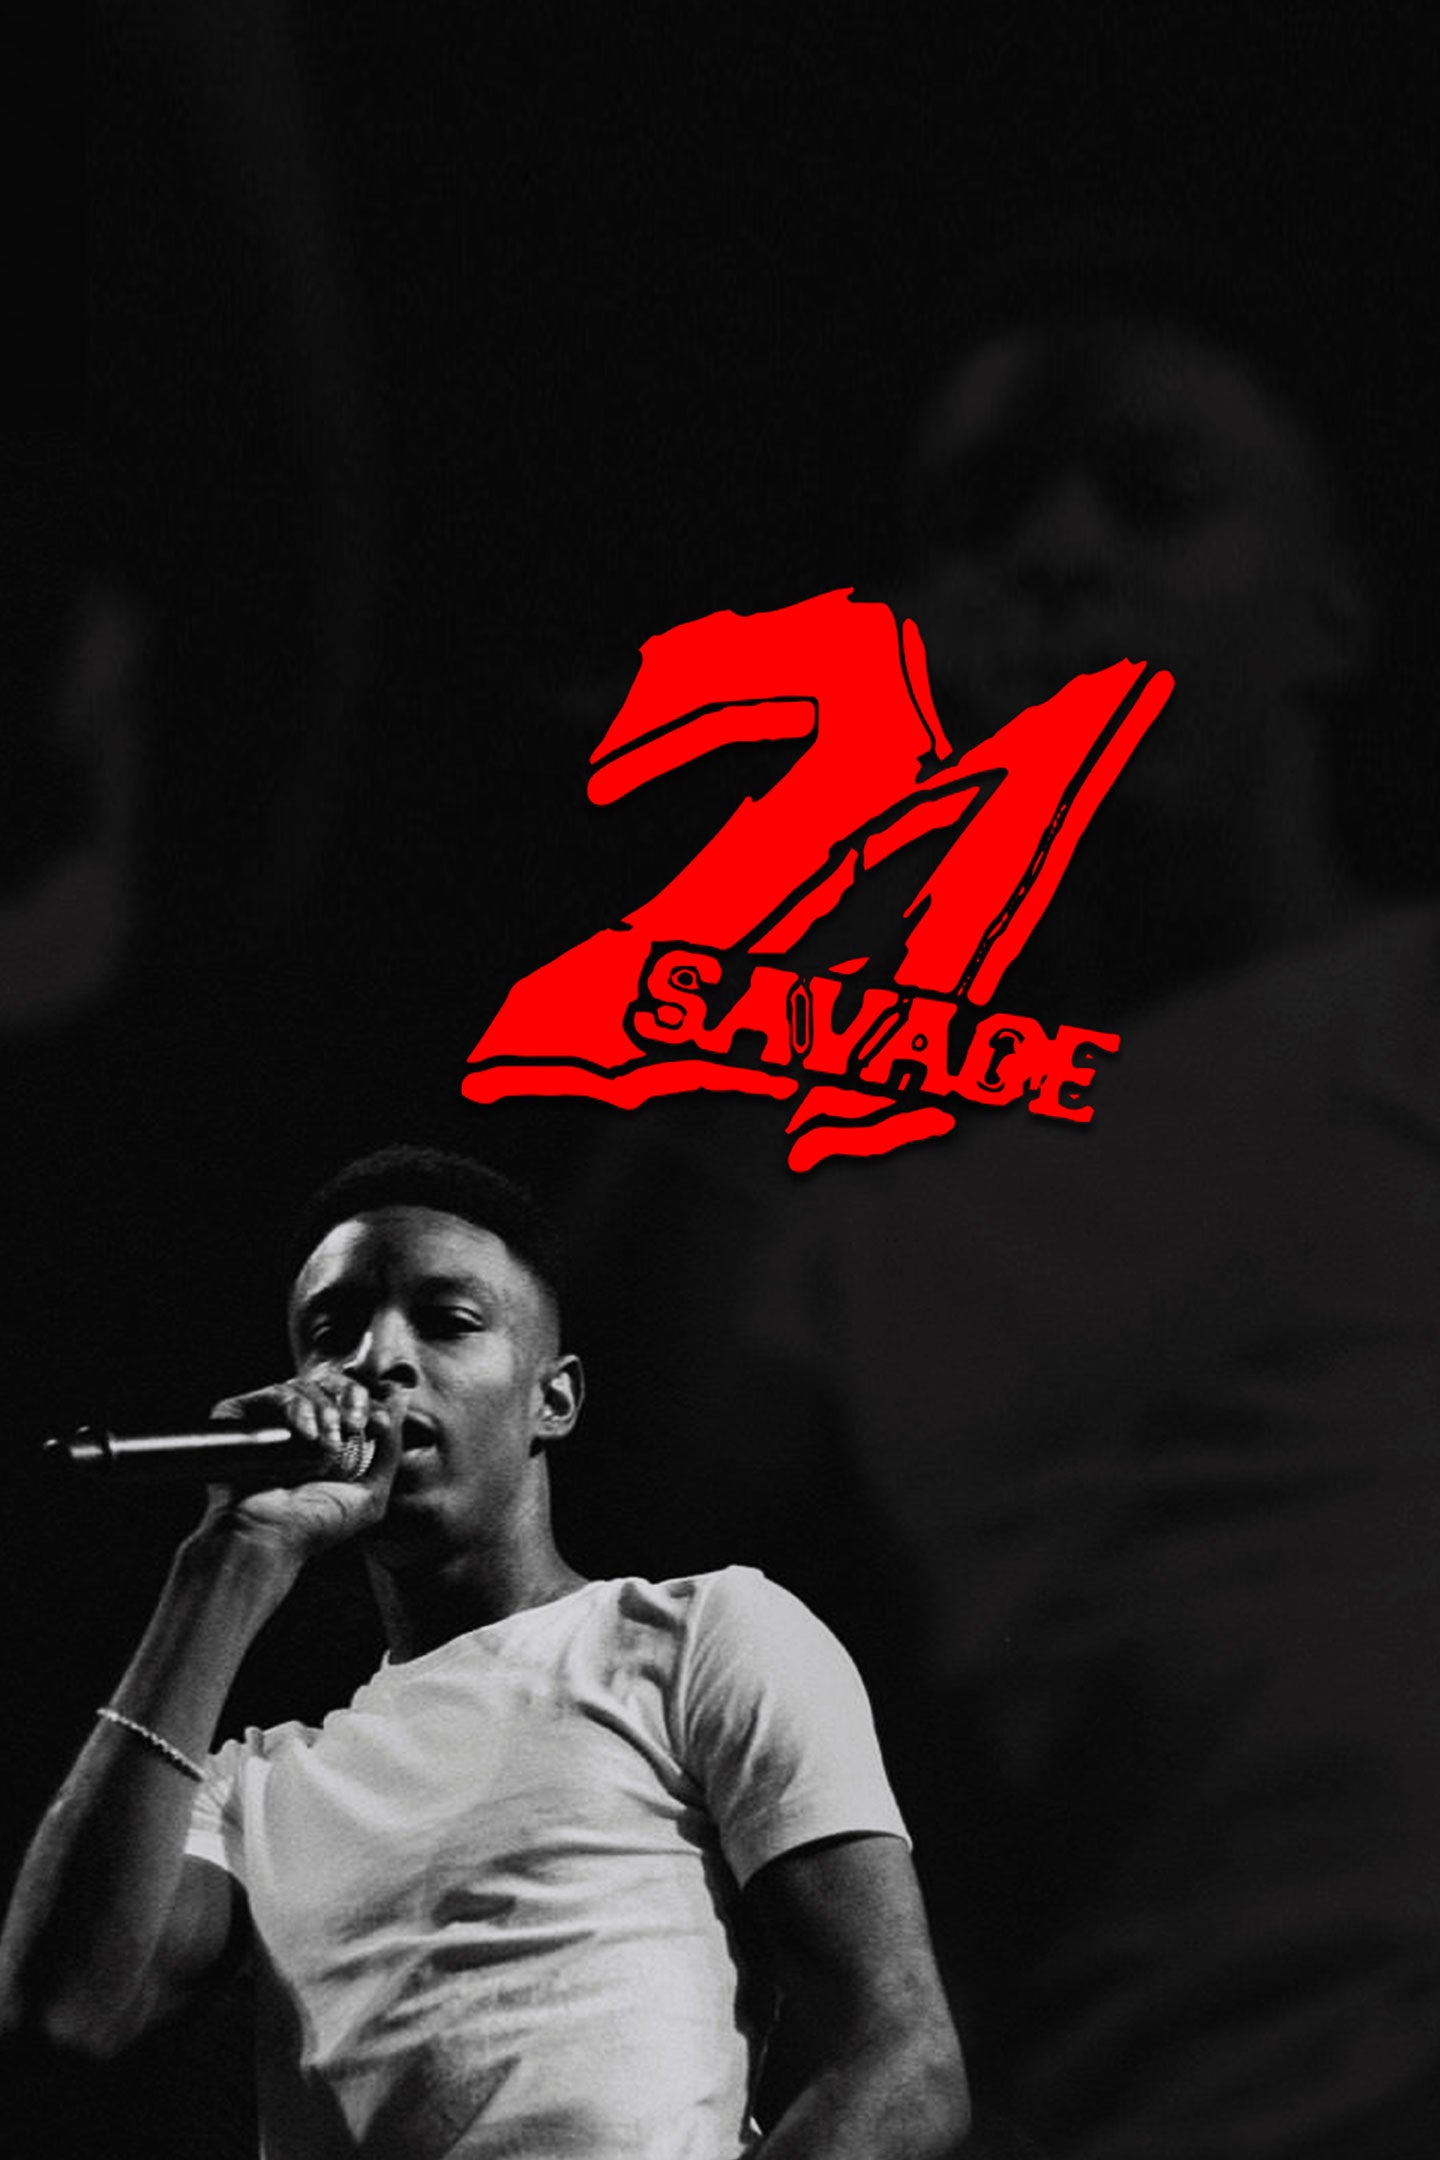 21 Savage 'History In The Making' Poster